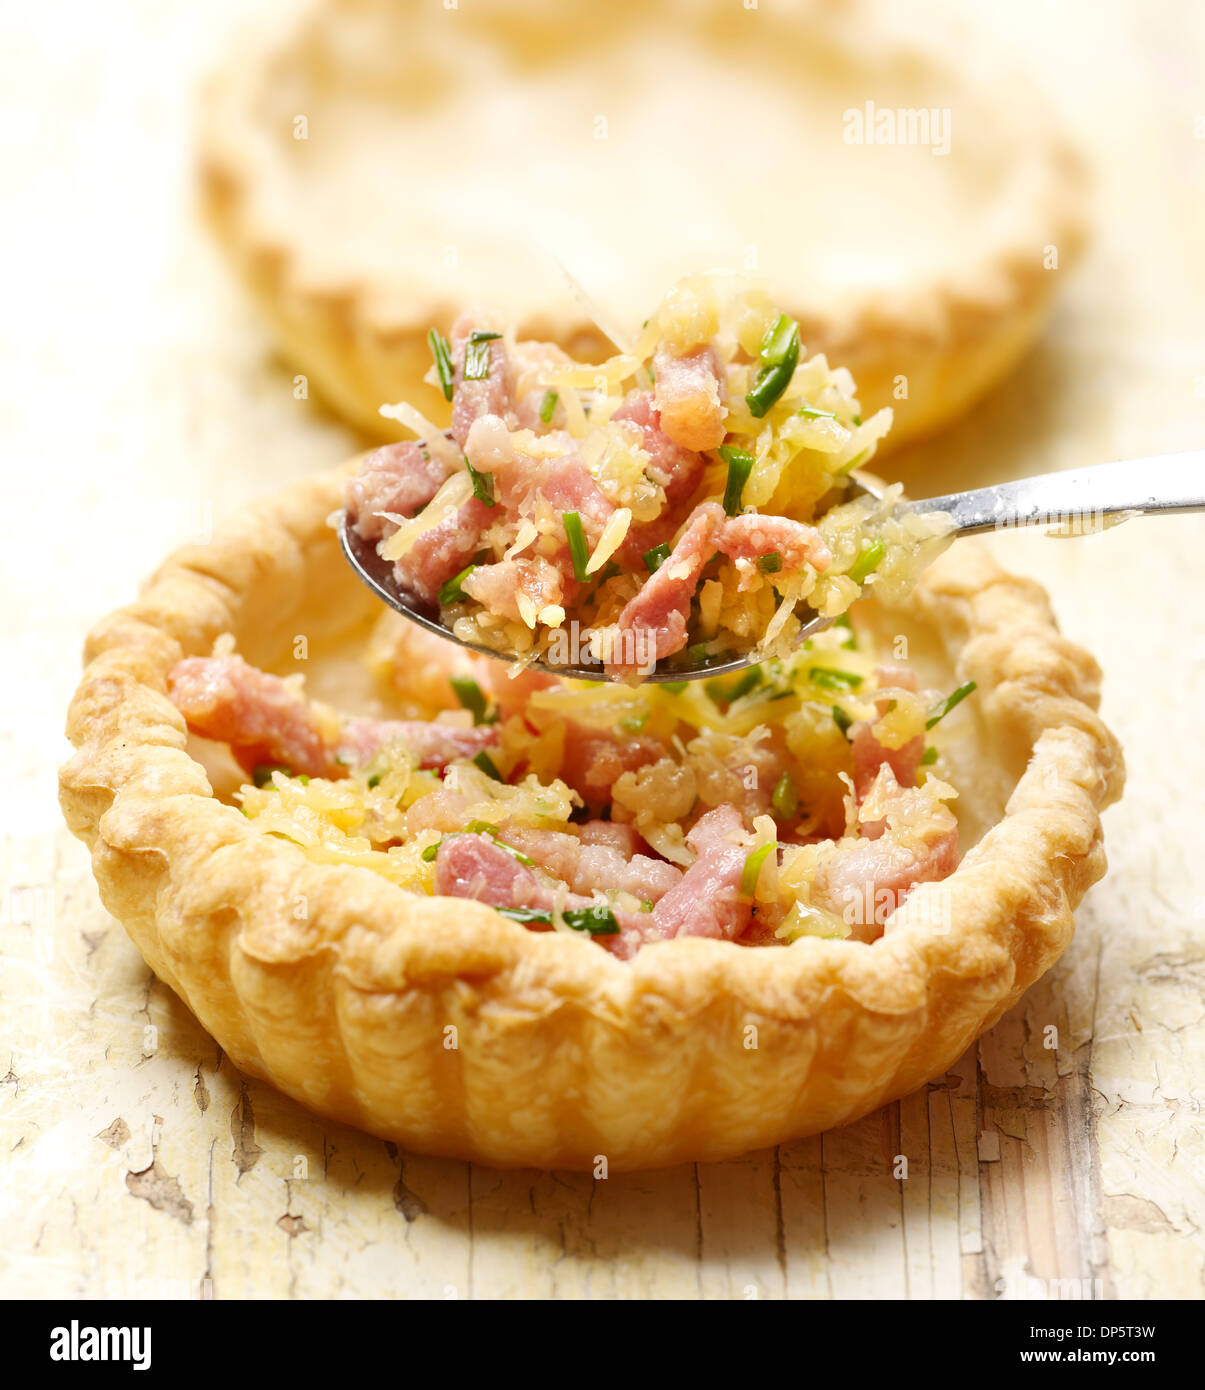 tasty quiche being prepared for dinner Stock Photo